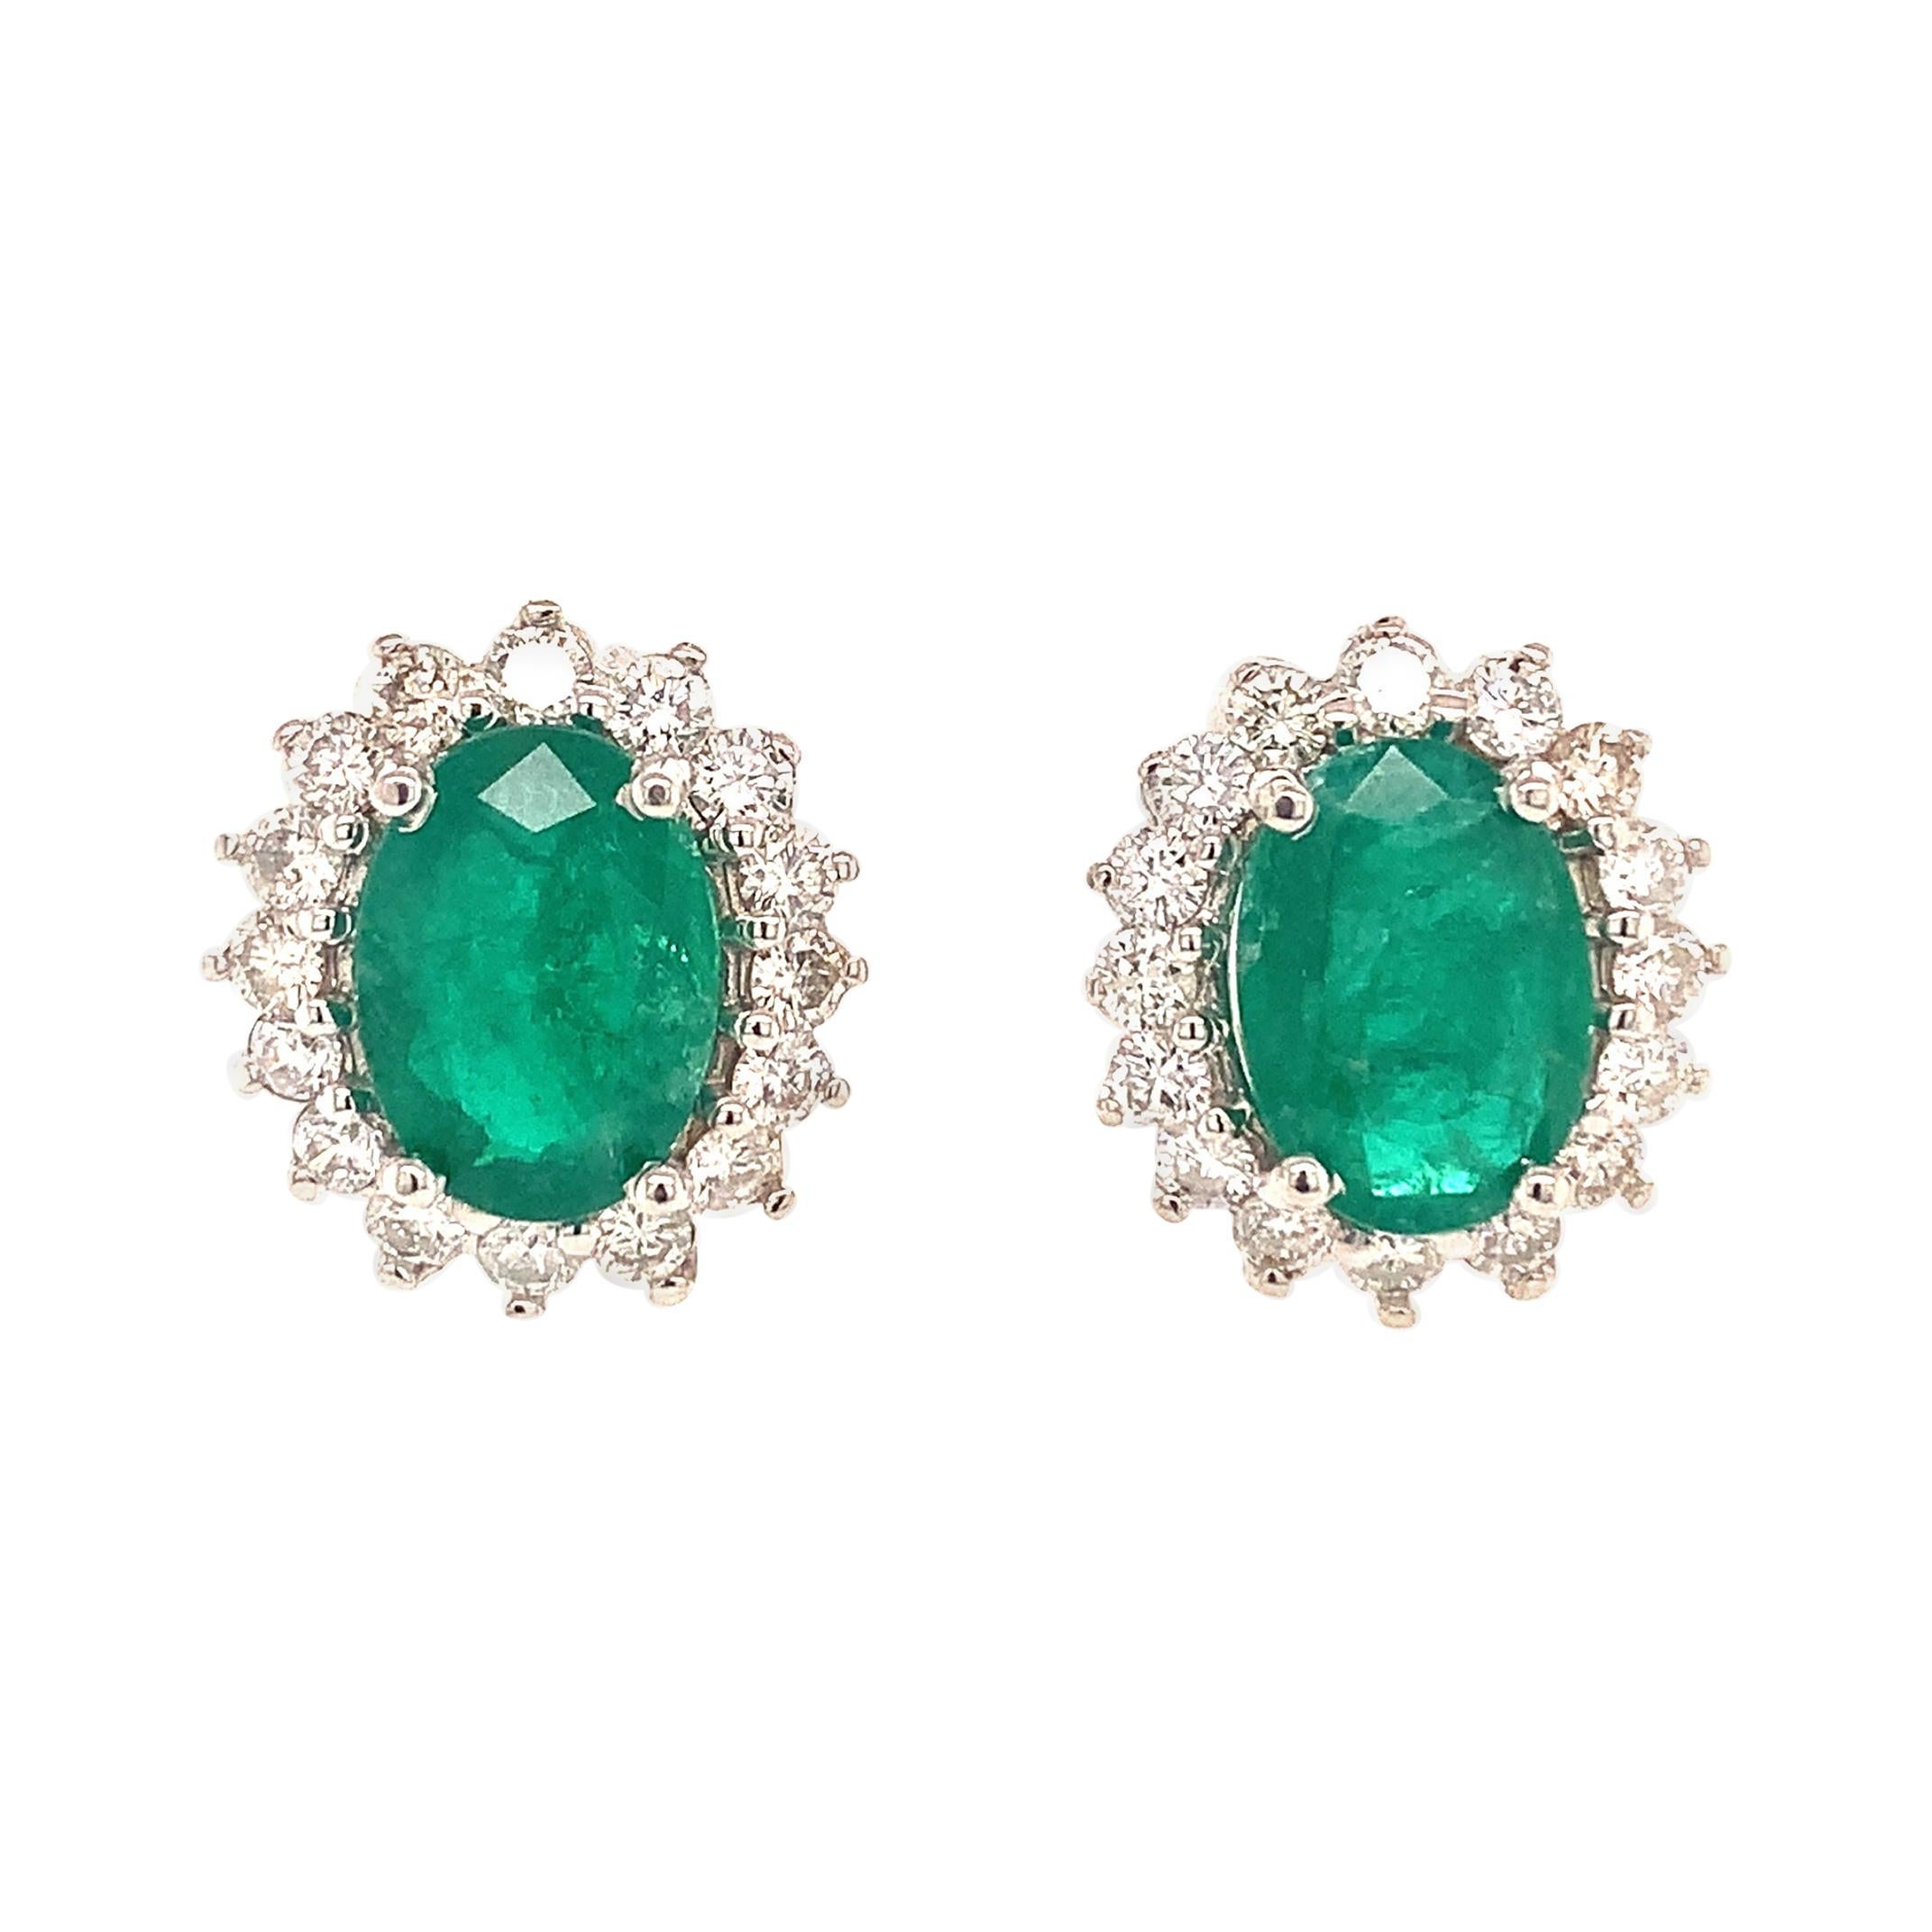 Natural Emerald Diamond Earrings 14k Gold 5.03 TCW Certified For Sale